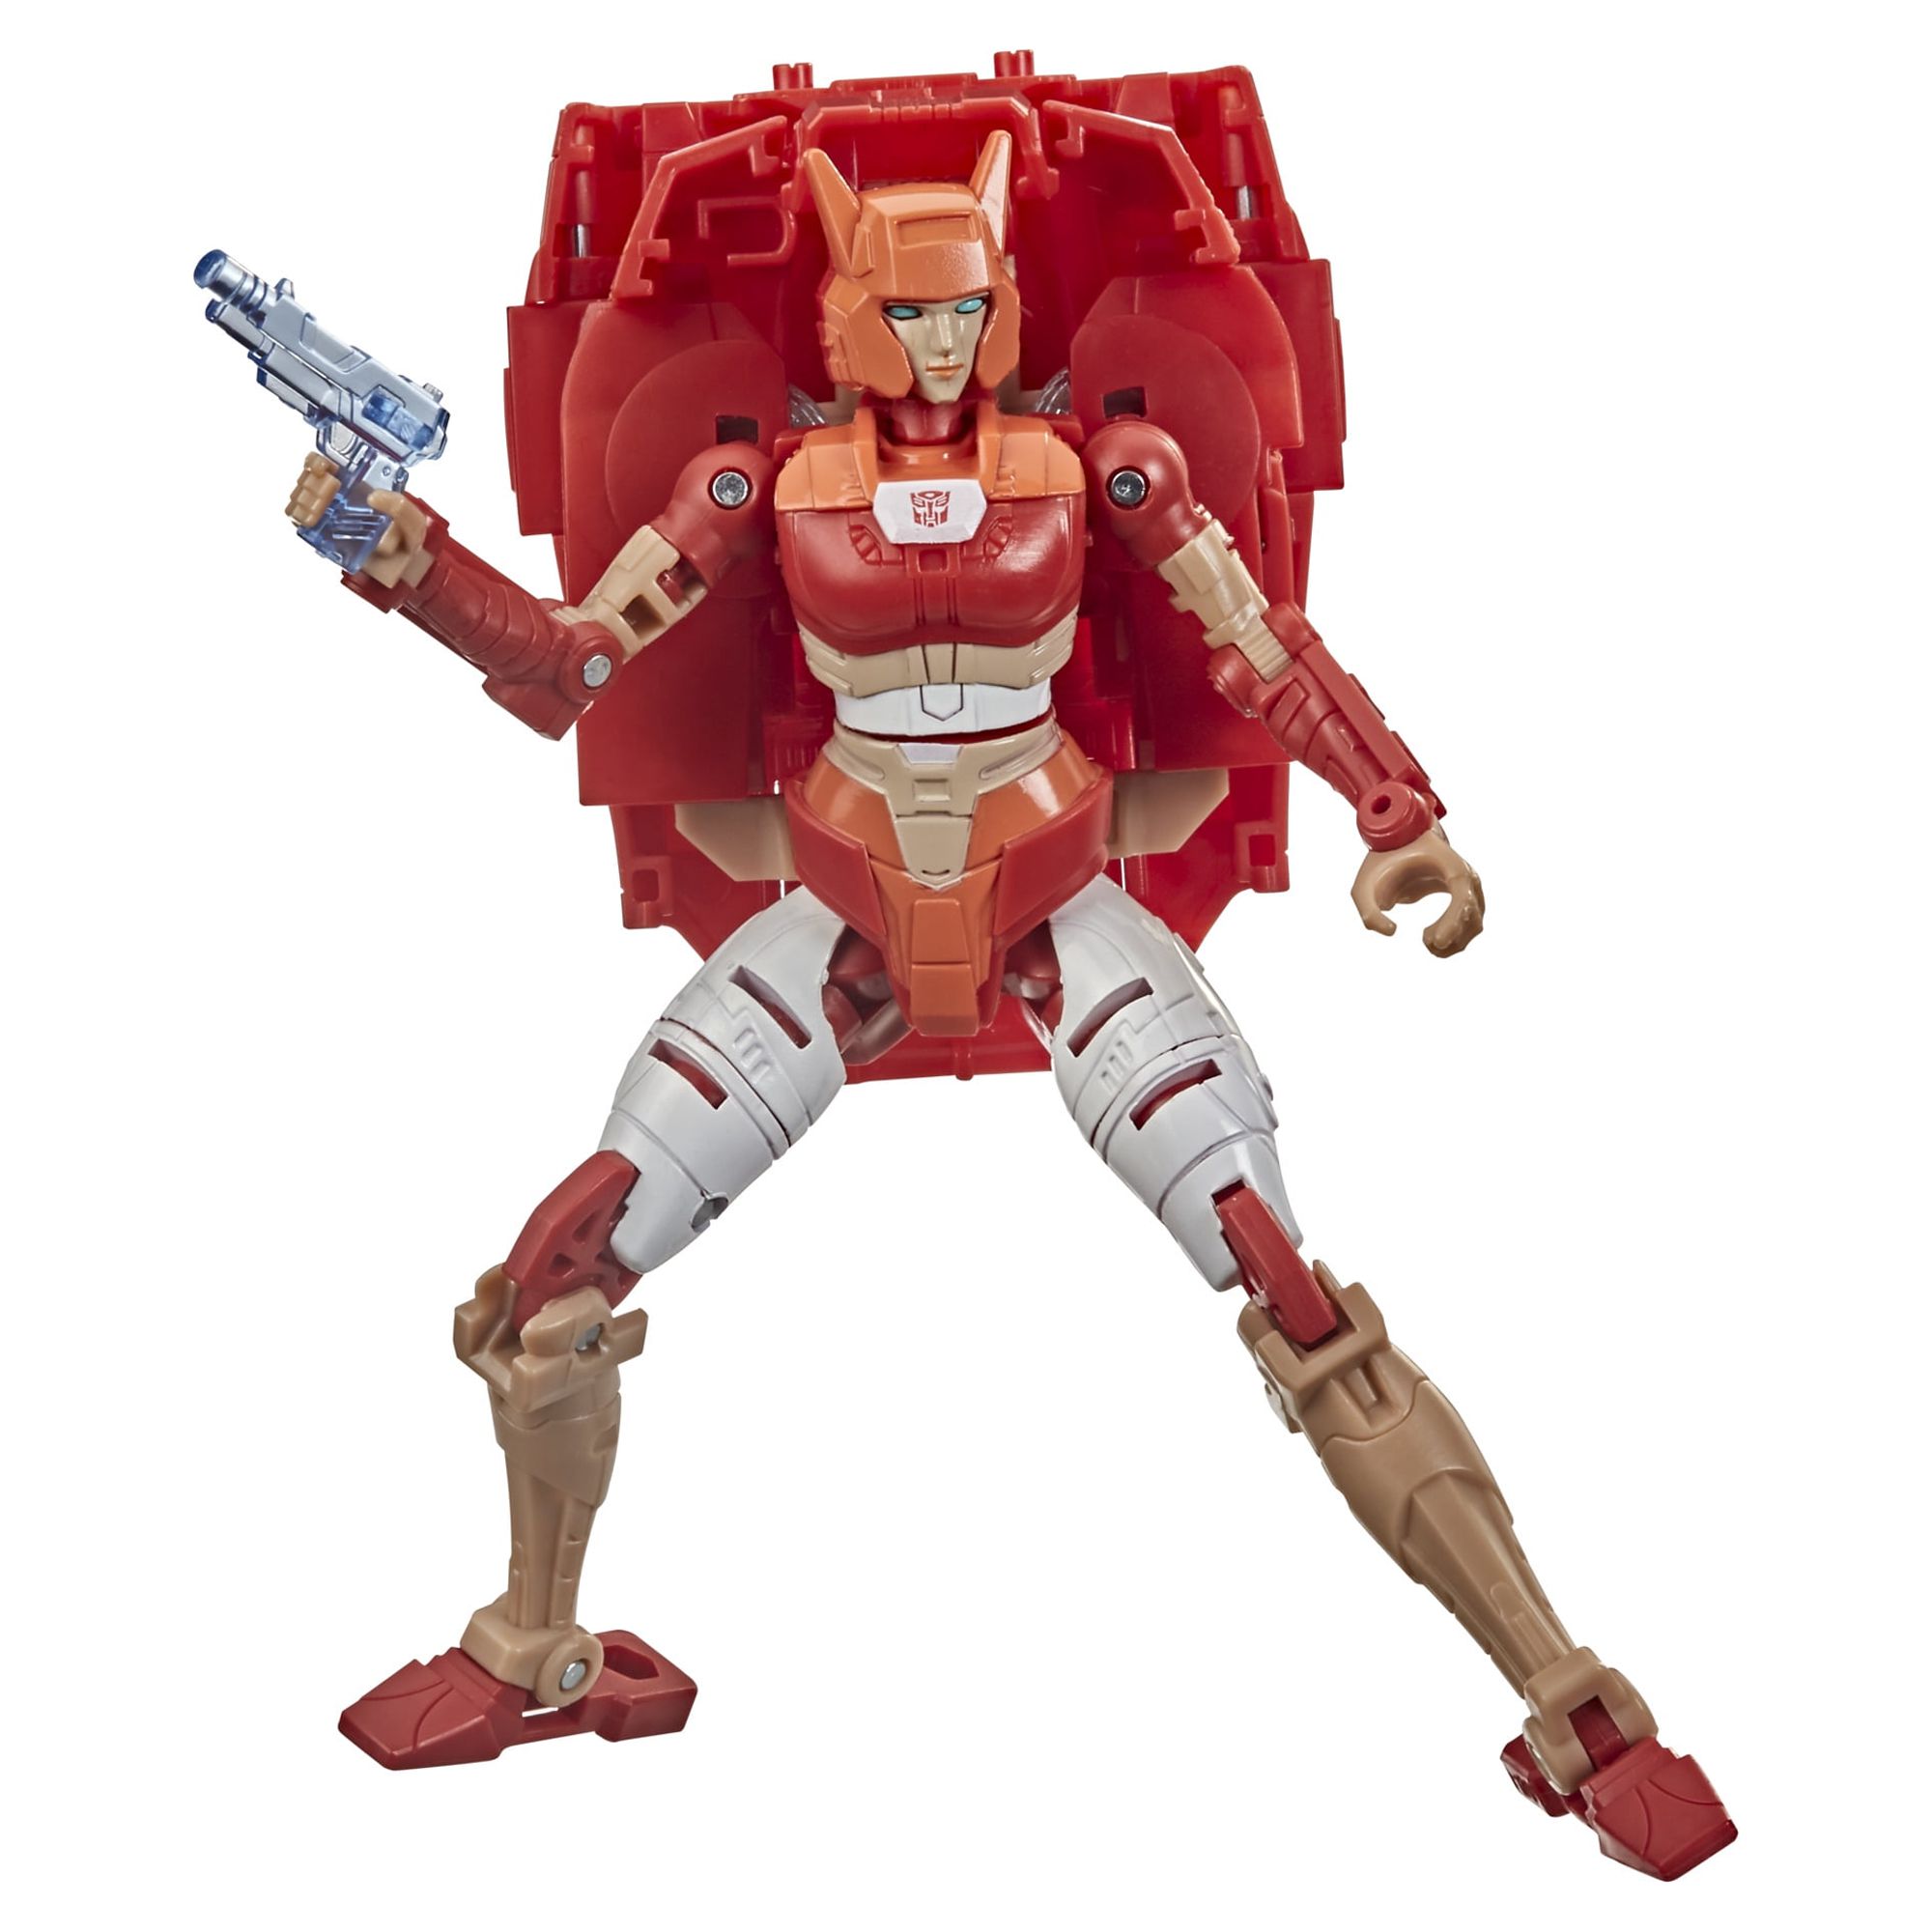 Transformers: War for Cybertron Autobot Elita 1 Kids Toy Action Figure for Boys and Girls (6") - image 5 of 5